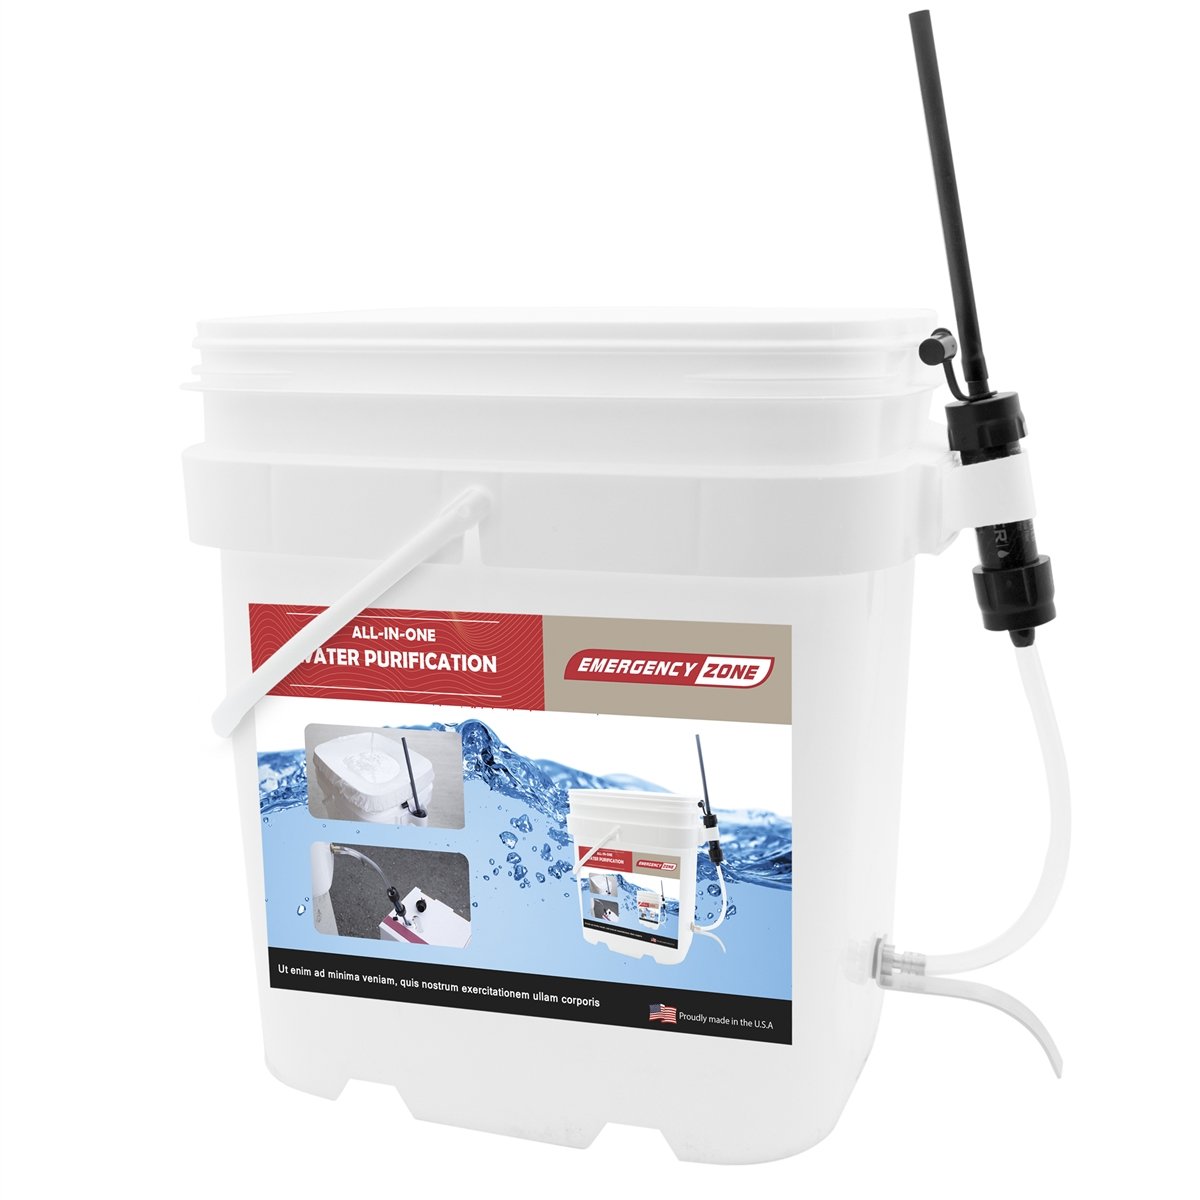 Picture of Emergency Zone 355 All-in-one Water Purification System